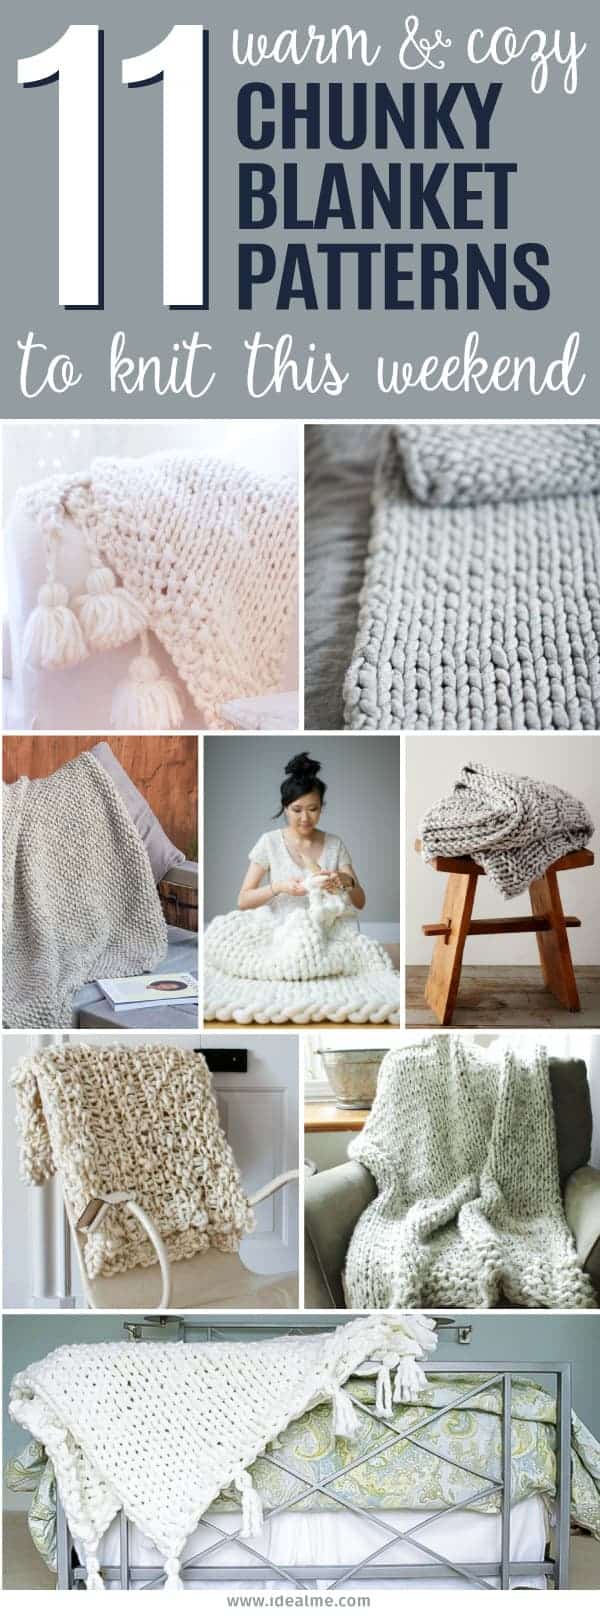 We've hunted down some of the most beautiful chunky knit blanket patterns that you'll definitely want to start knitting this weekend.